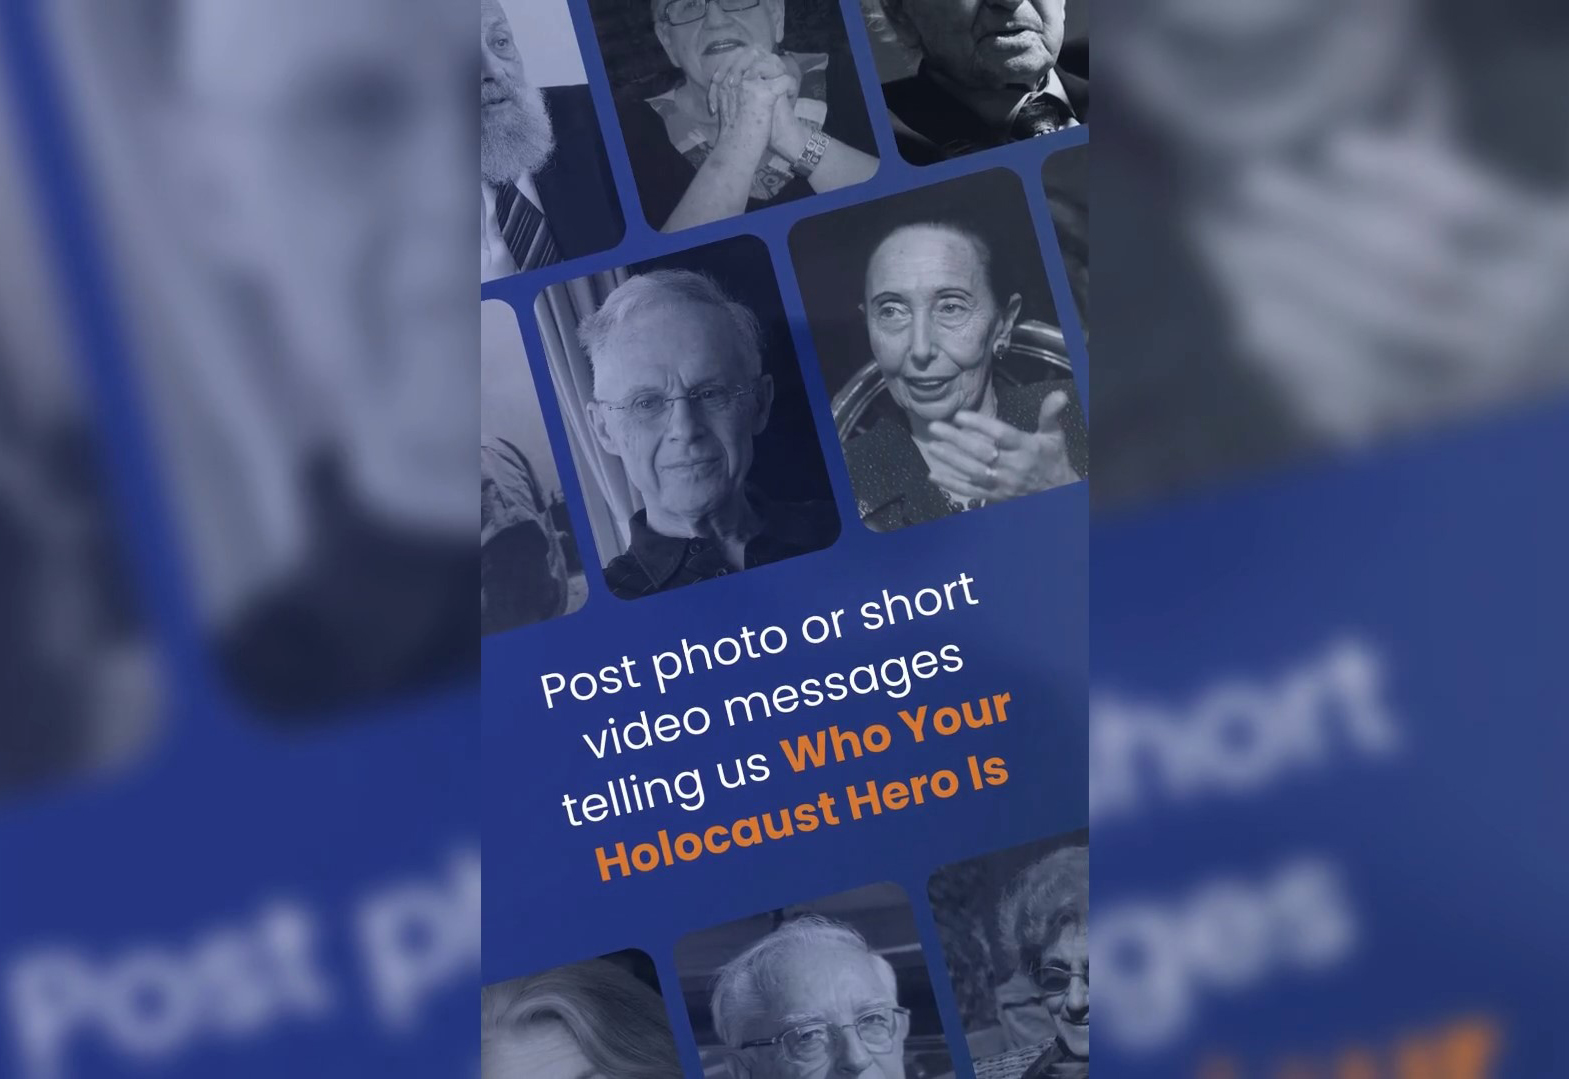 Remembering Heroes from the Holocaust